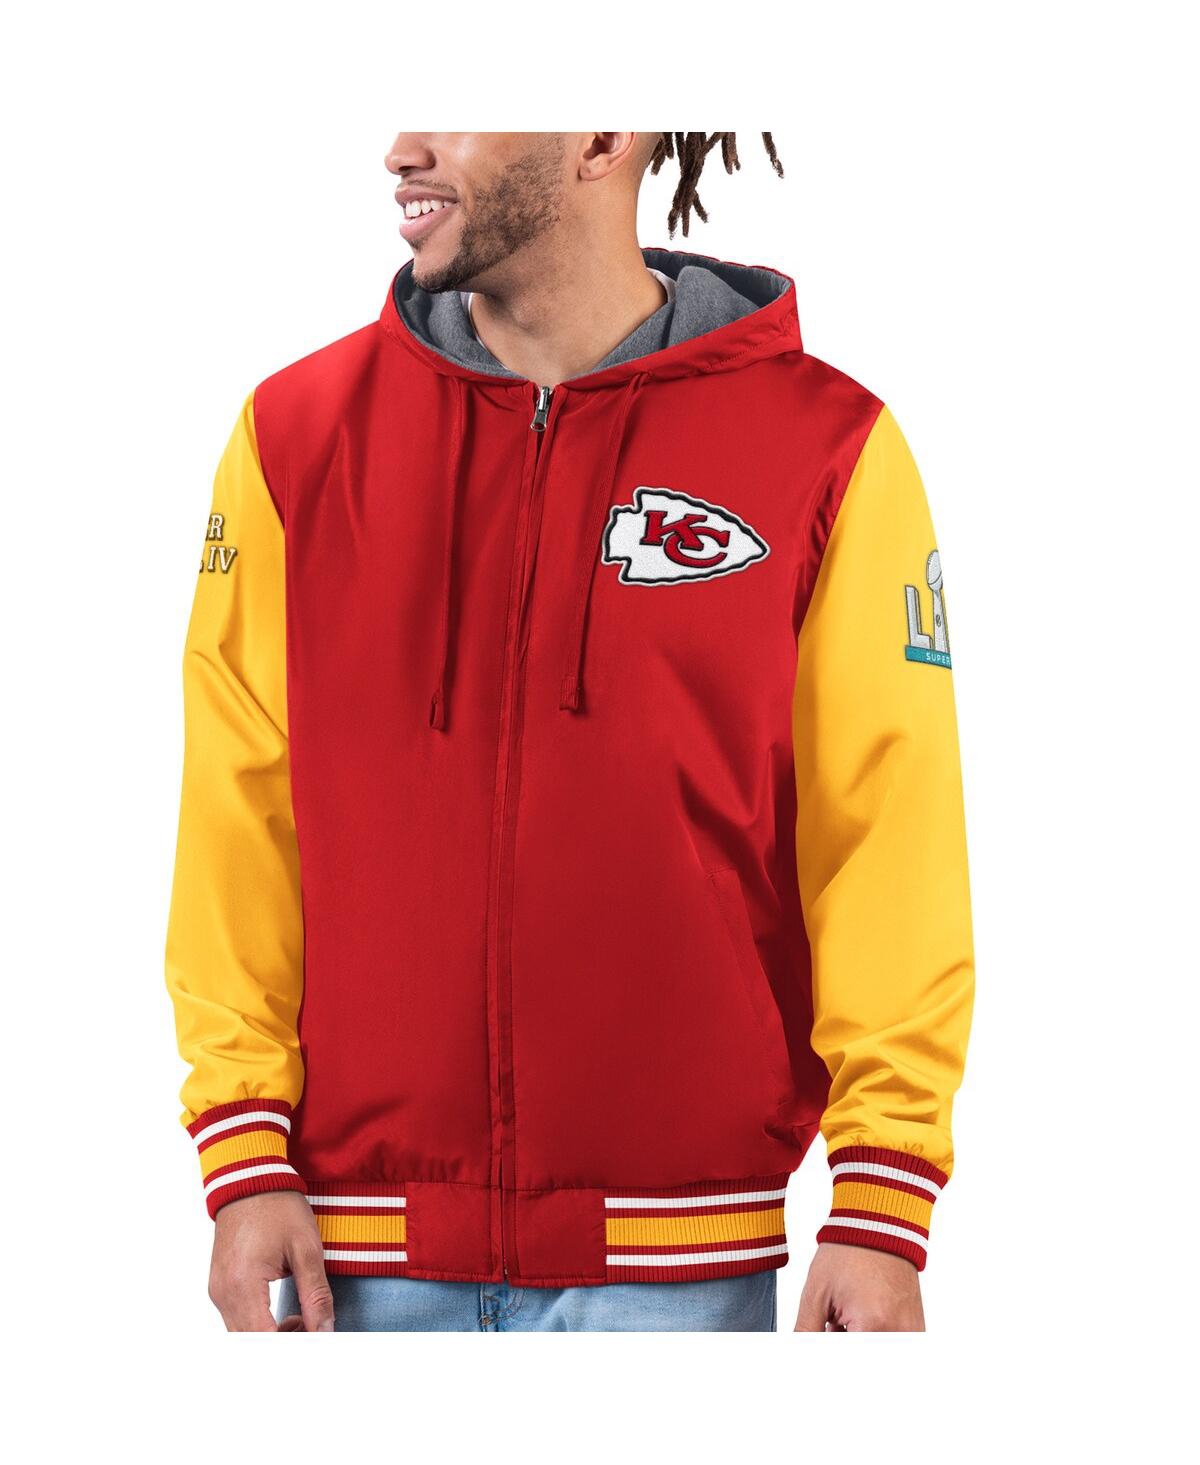 Men's G-iii Sports by Carl Banks Red, Gold Kansas City Chiefs Commemorative Reversible Full-Zip Jacket - Red, Gold